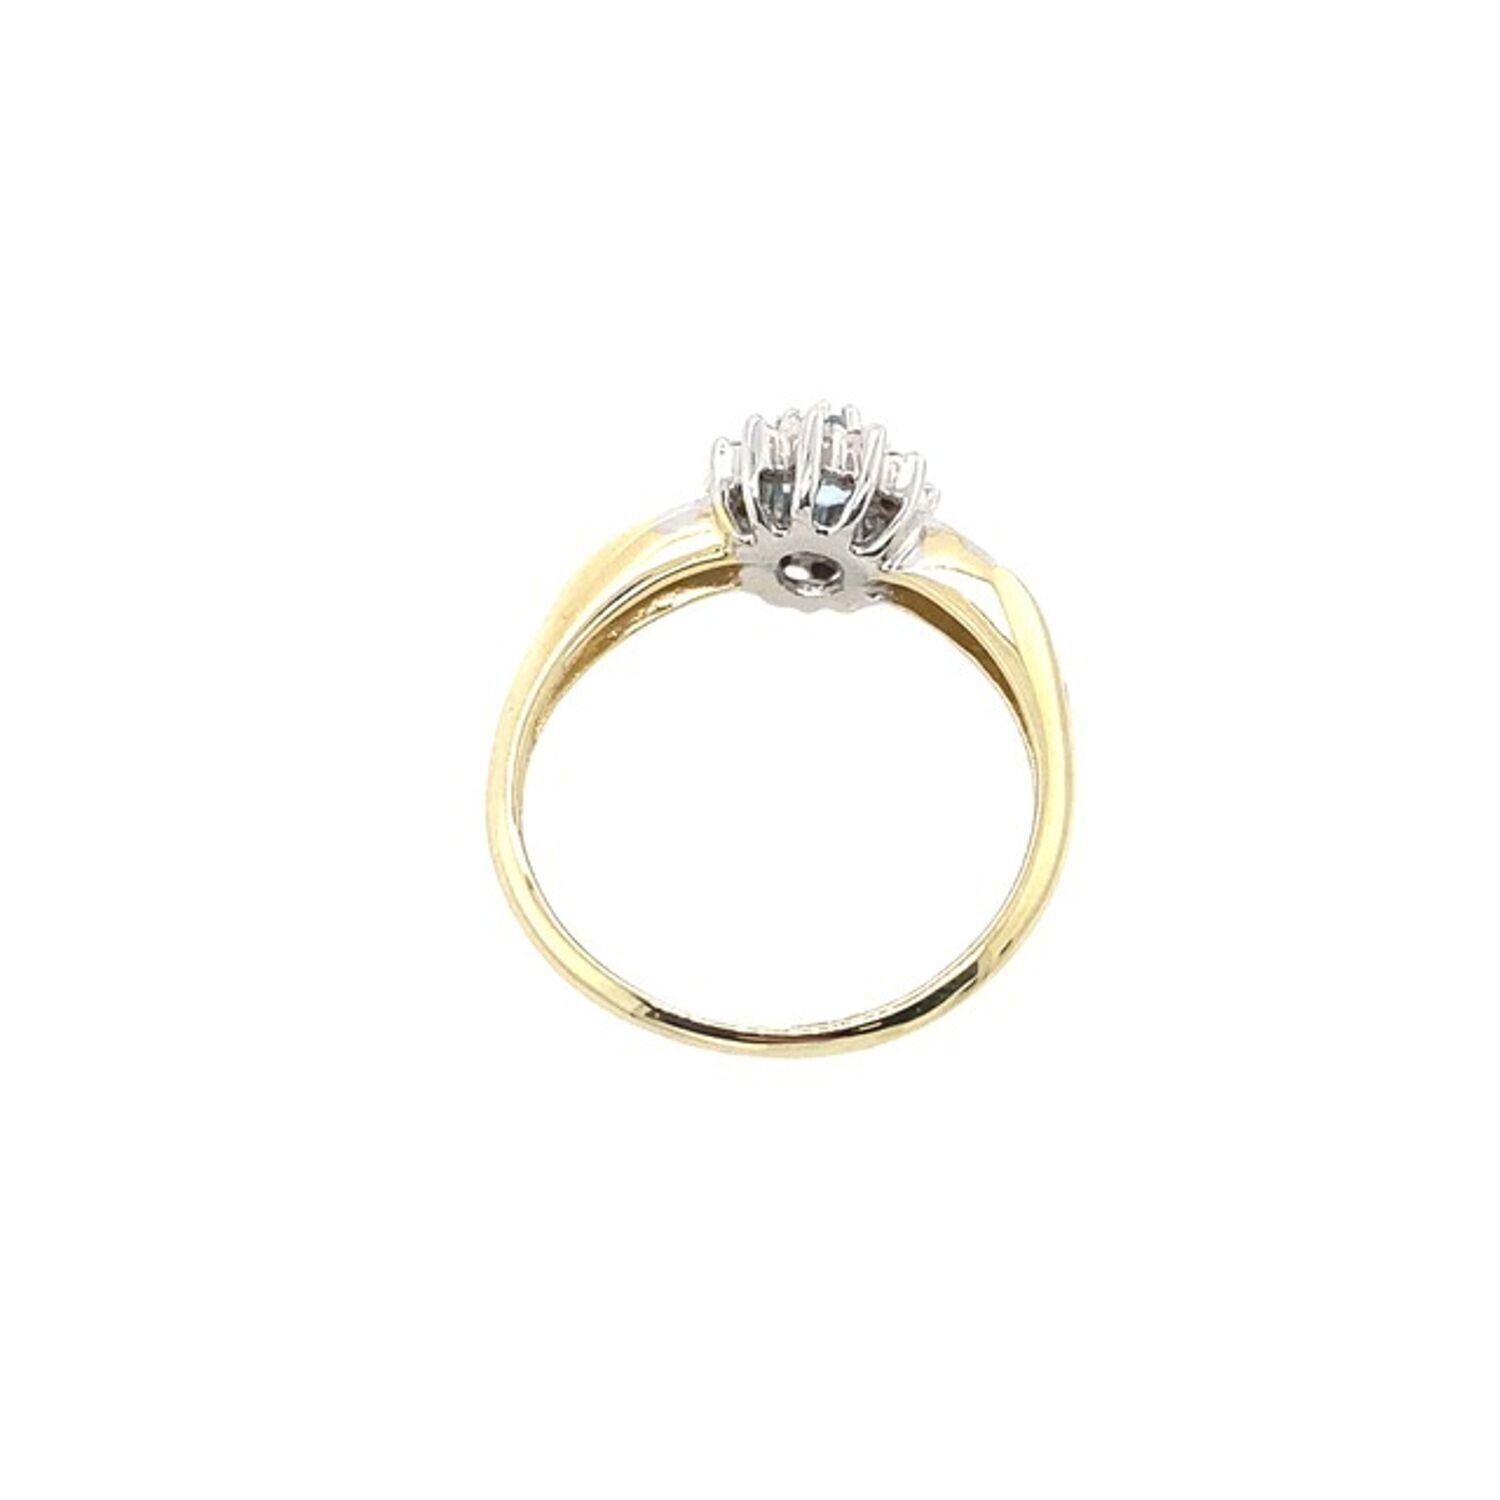 This gorgeous oval aquamarine ring set in 9ct yellow & white gold setting. with 0.15ct natural round brilliant cut diamonds halo and shoulders. This is a unique and eye-catching ring.

Additional Information:
Total Diamond Weight: 0.16ct
Diamond